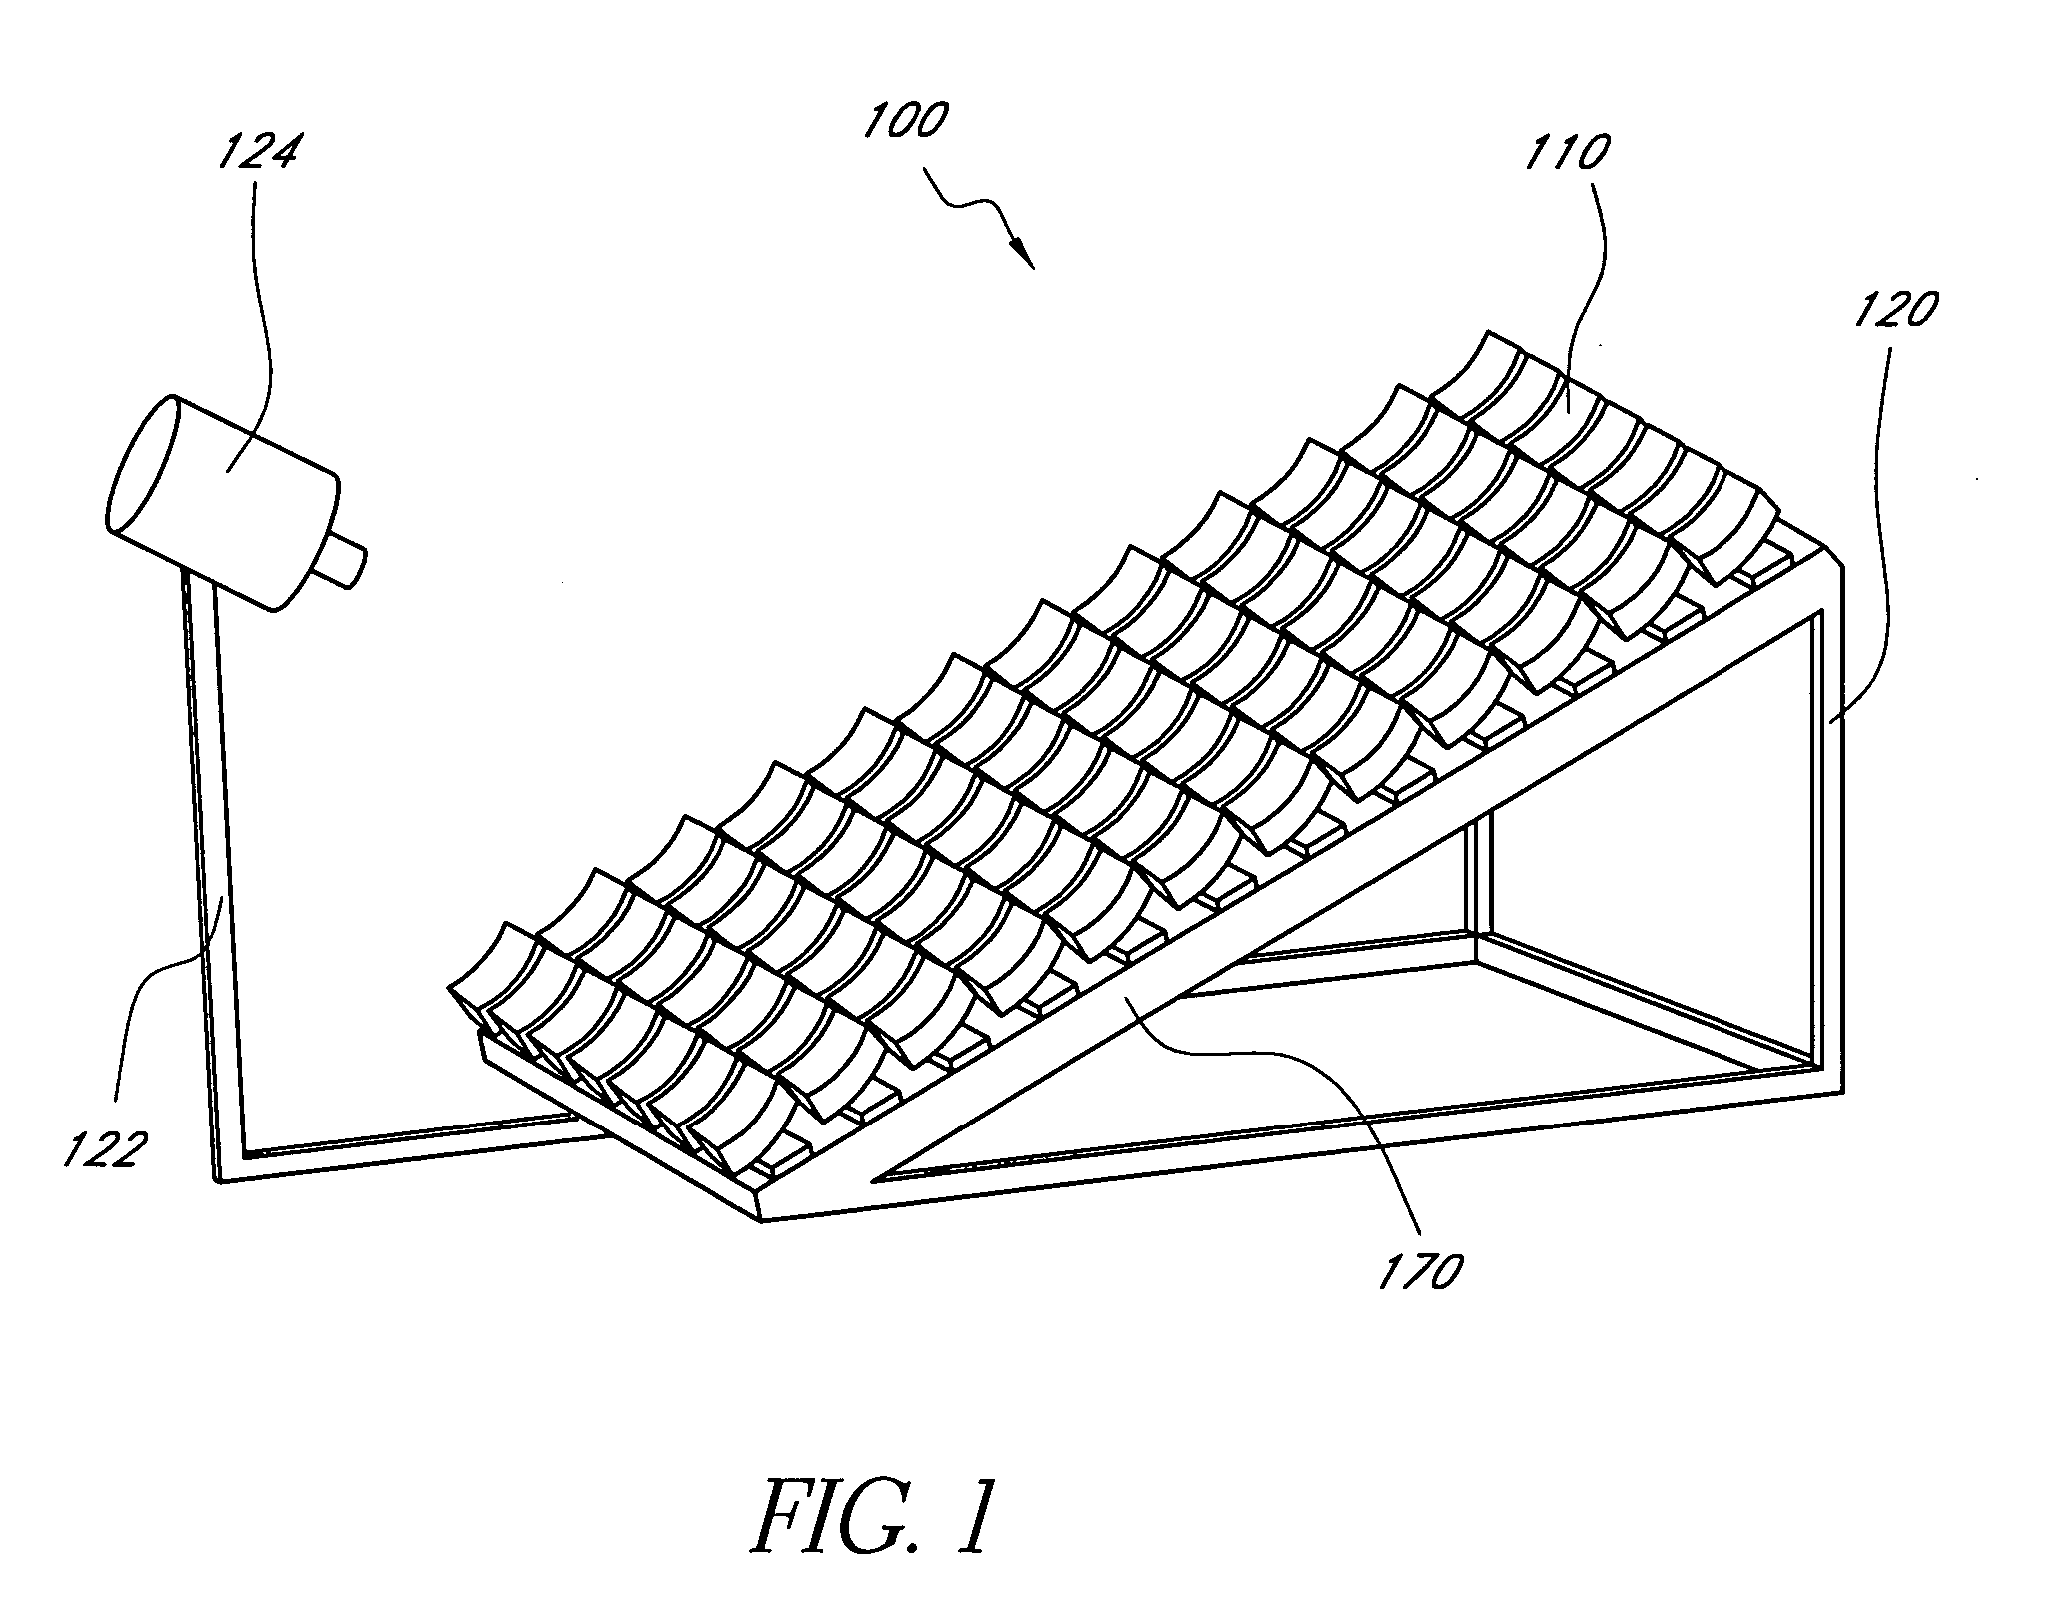 Solar concentrator array with individually adjustable elements